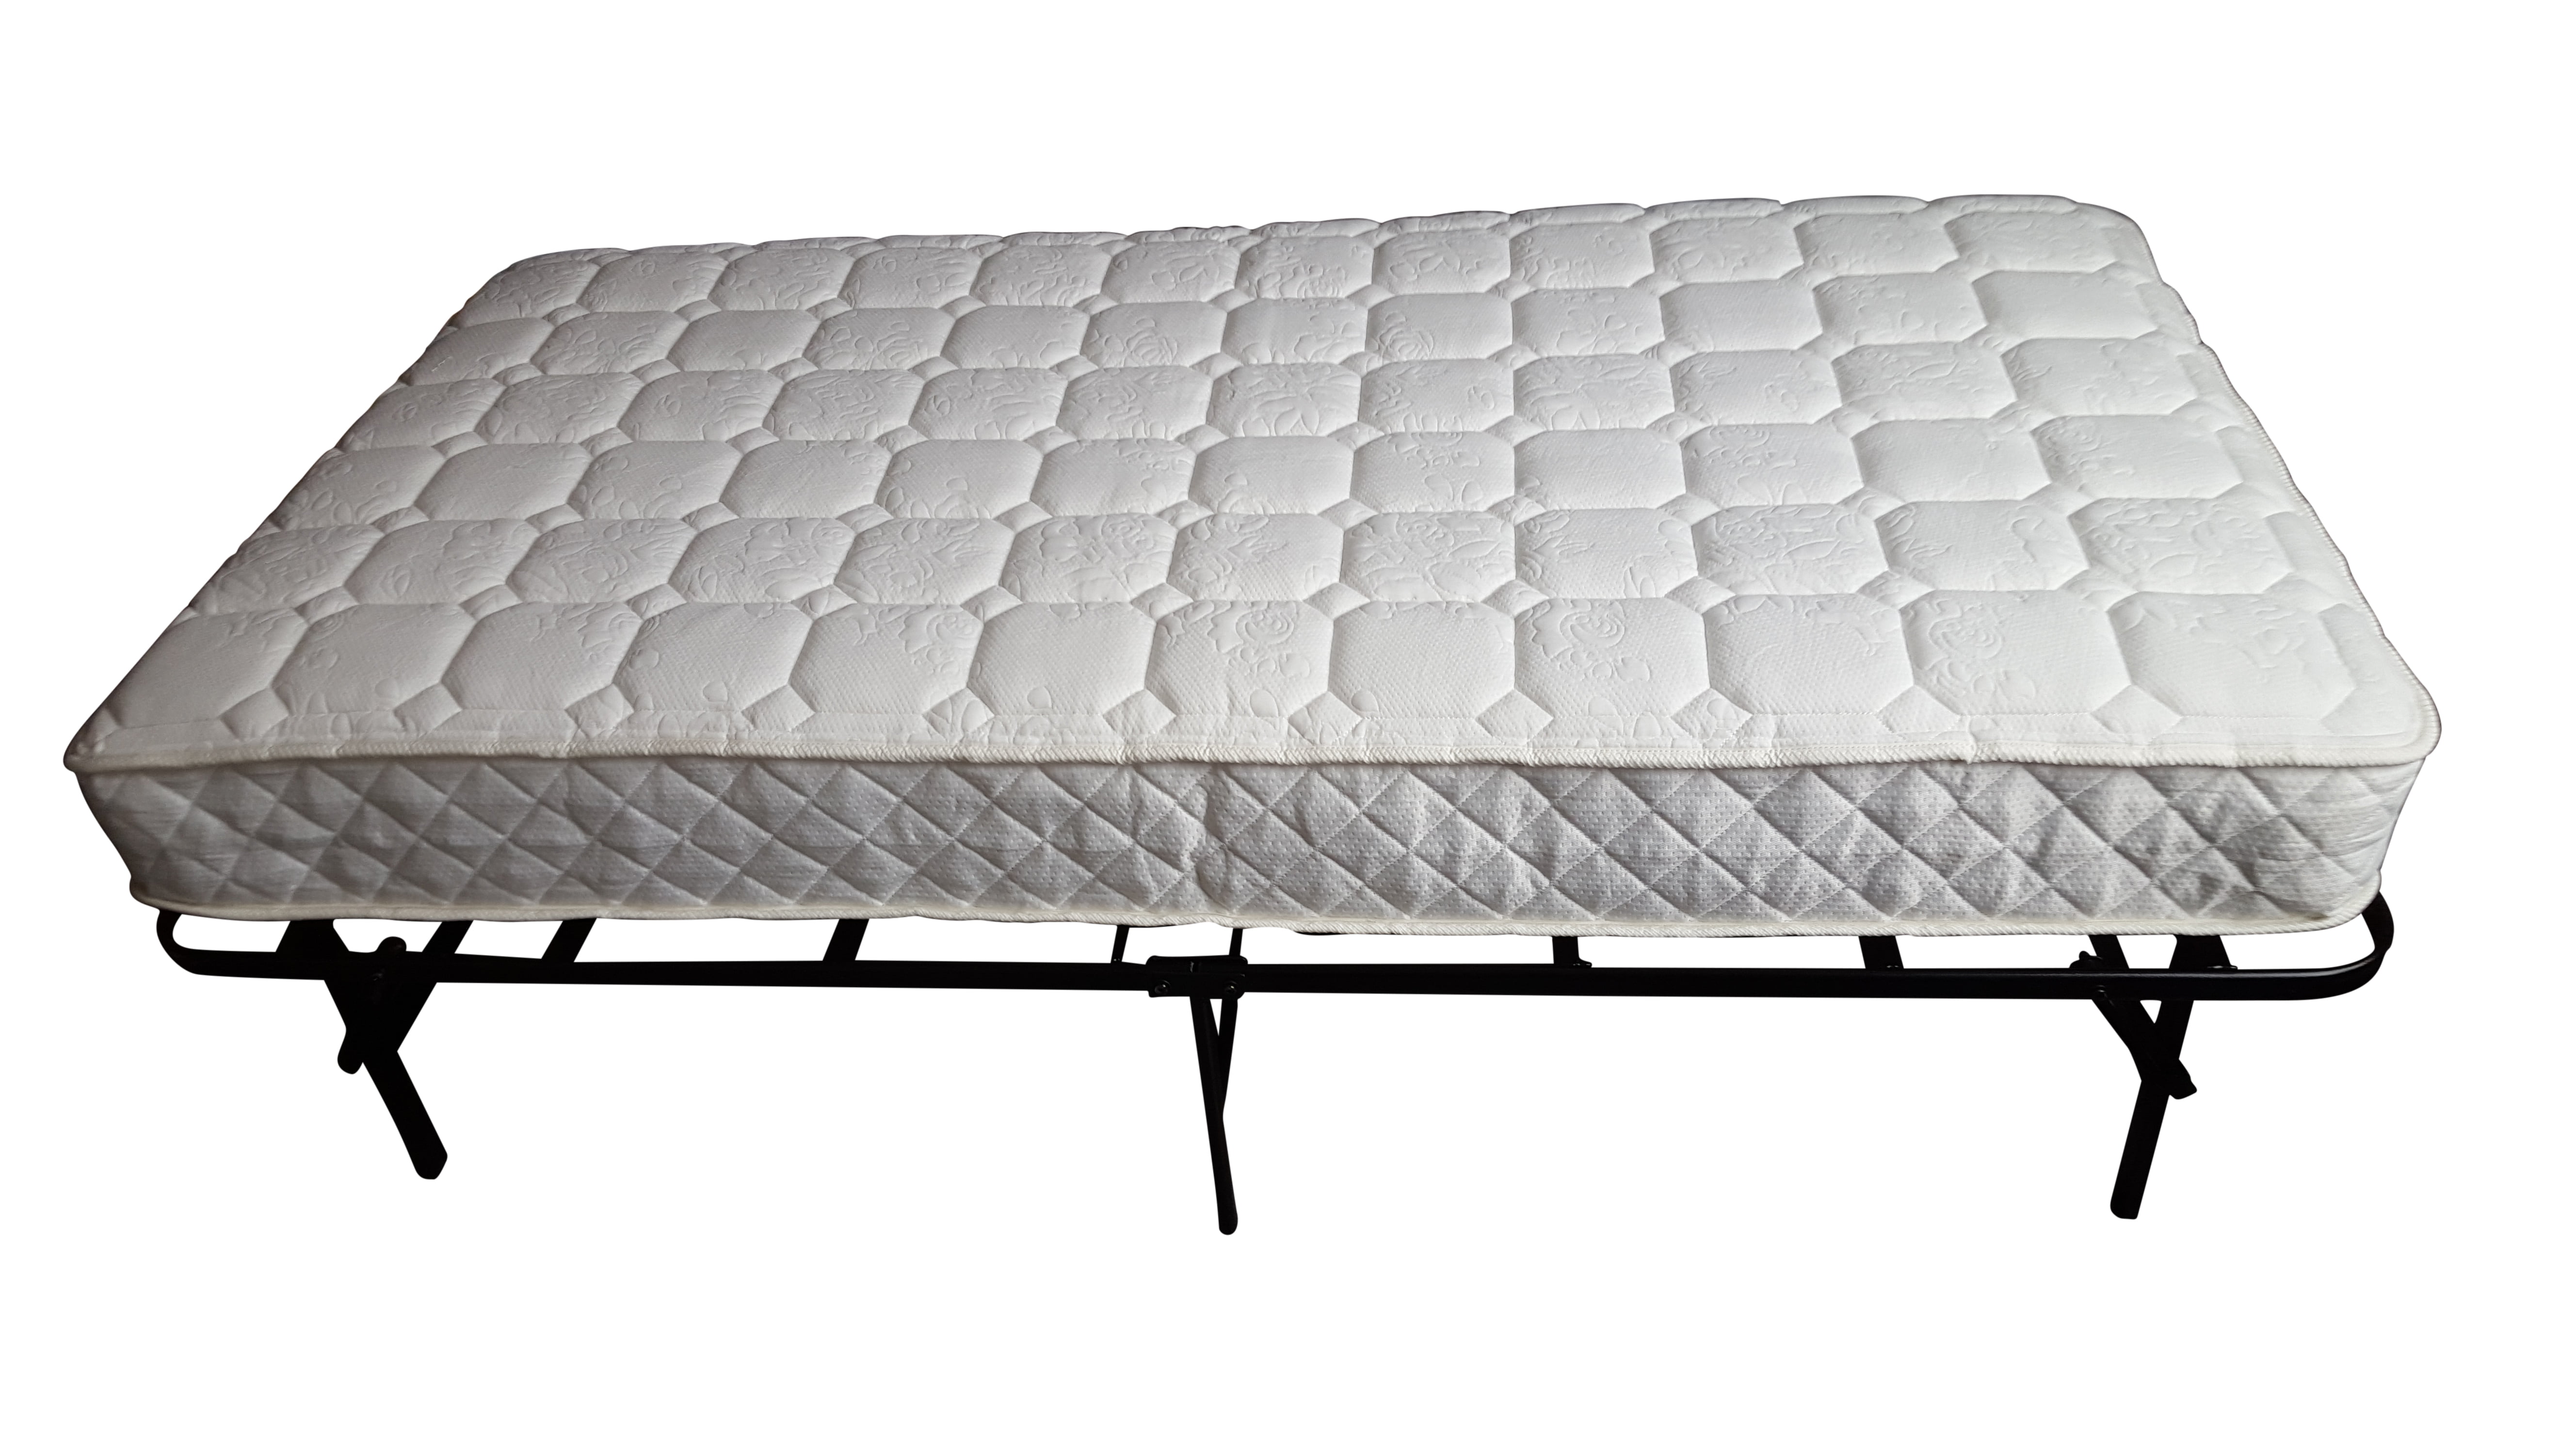 Twin Size Bed Frame and Mattress Combo by AdJUST4Me   Walmart.